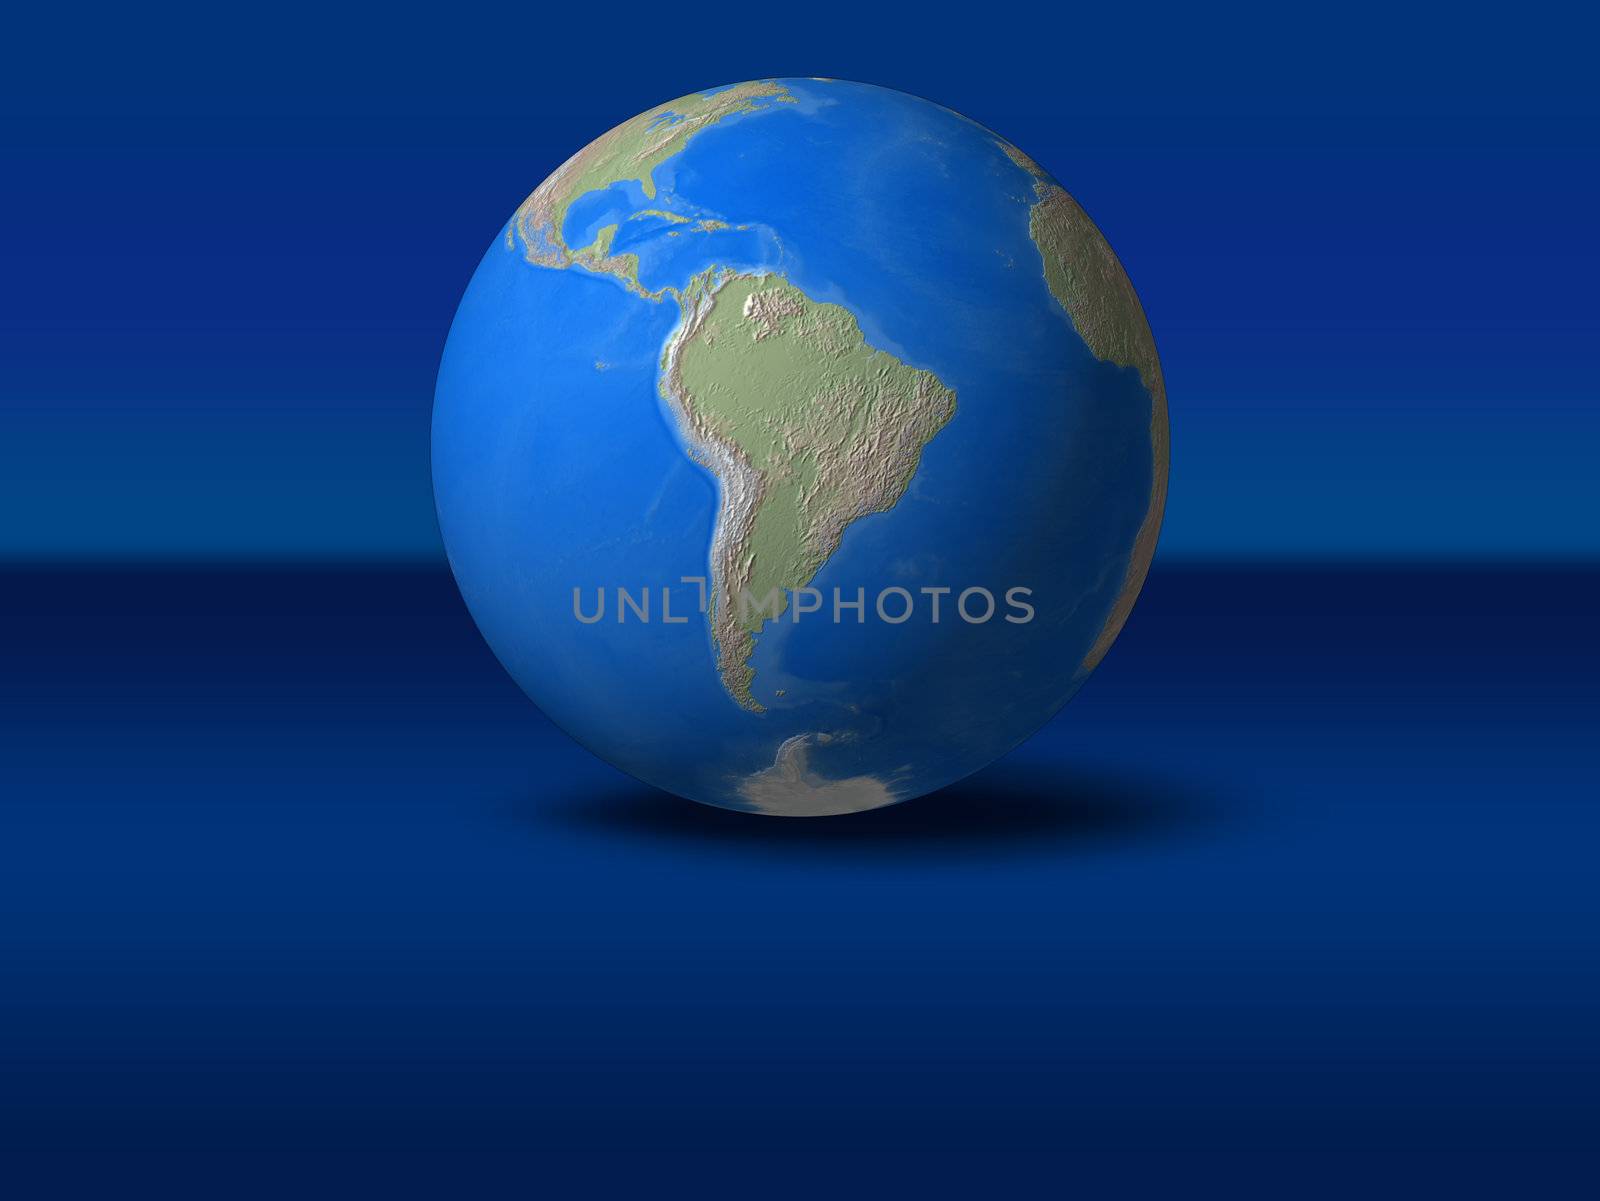 World Globe on blue graphic background
South America view